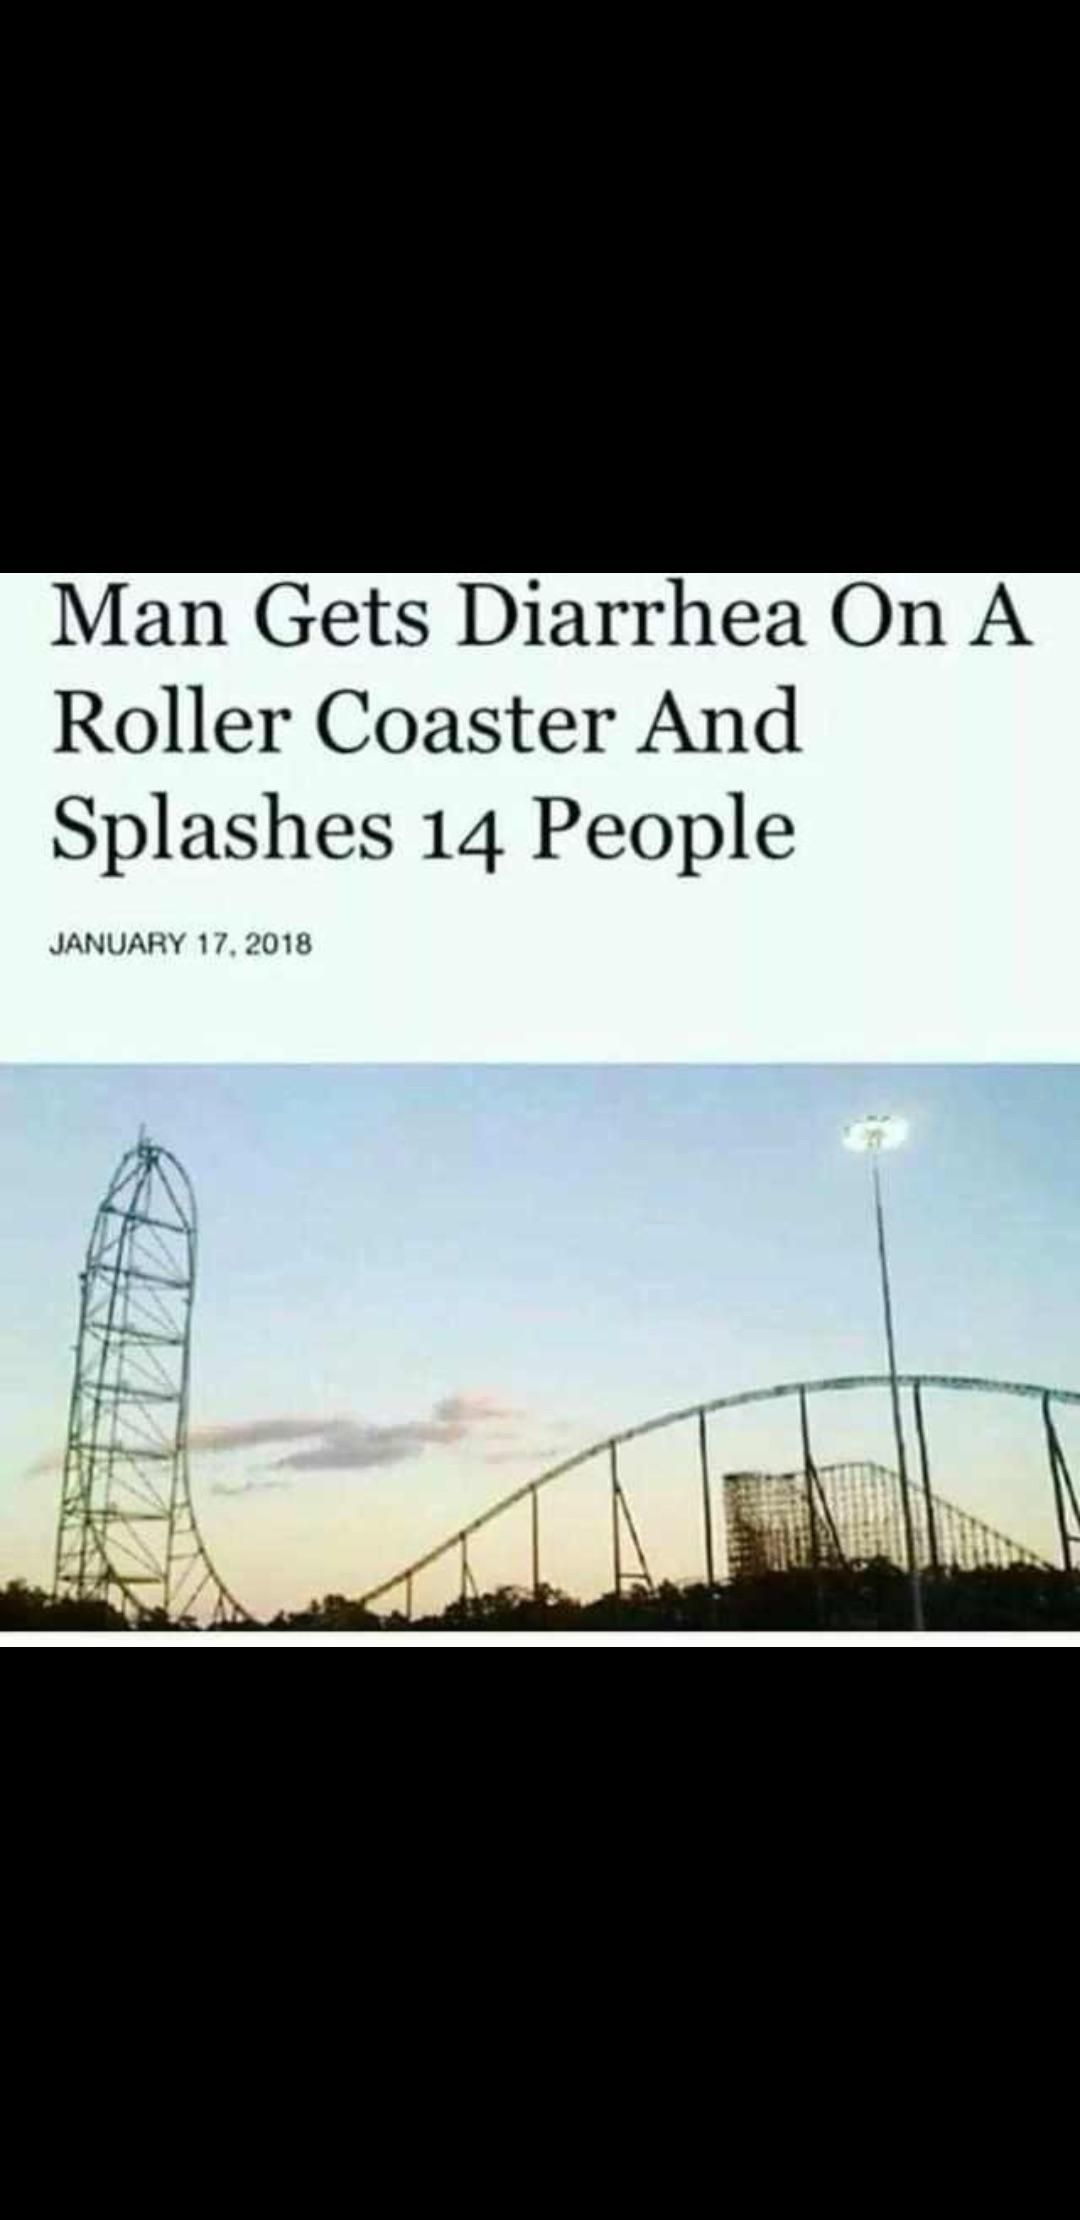 Roses are red. A church has a steeple...